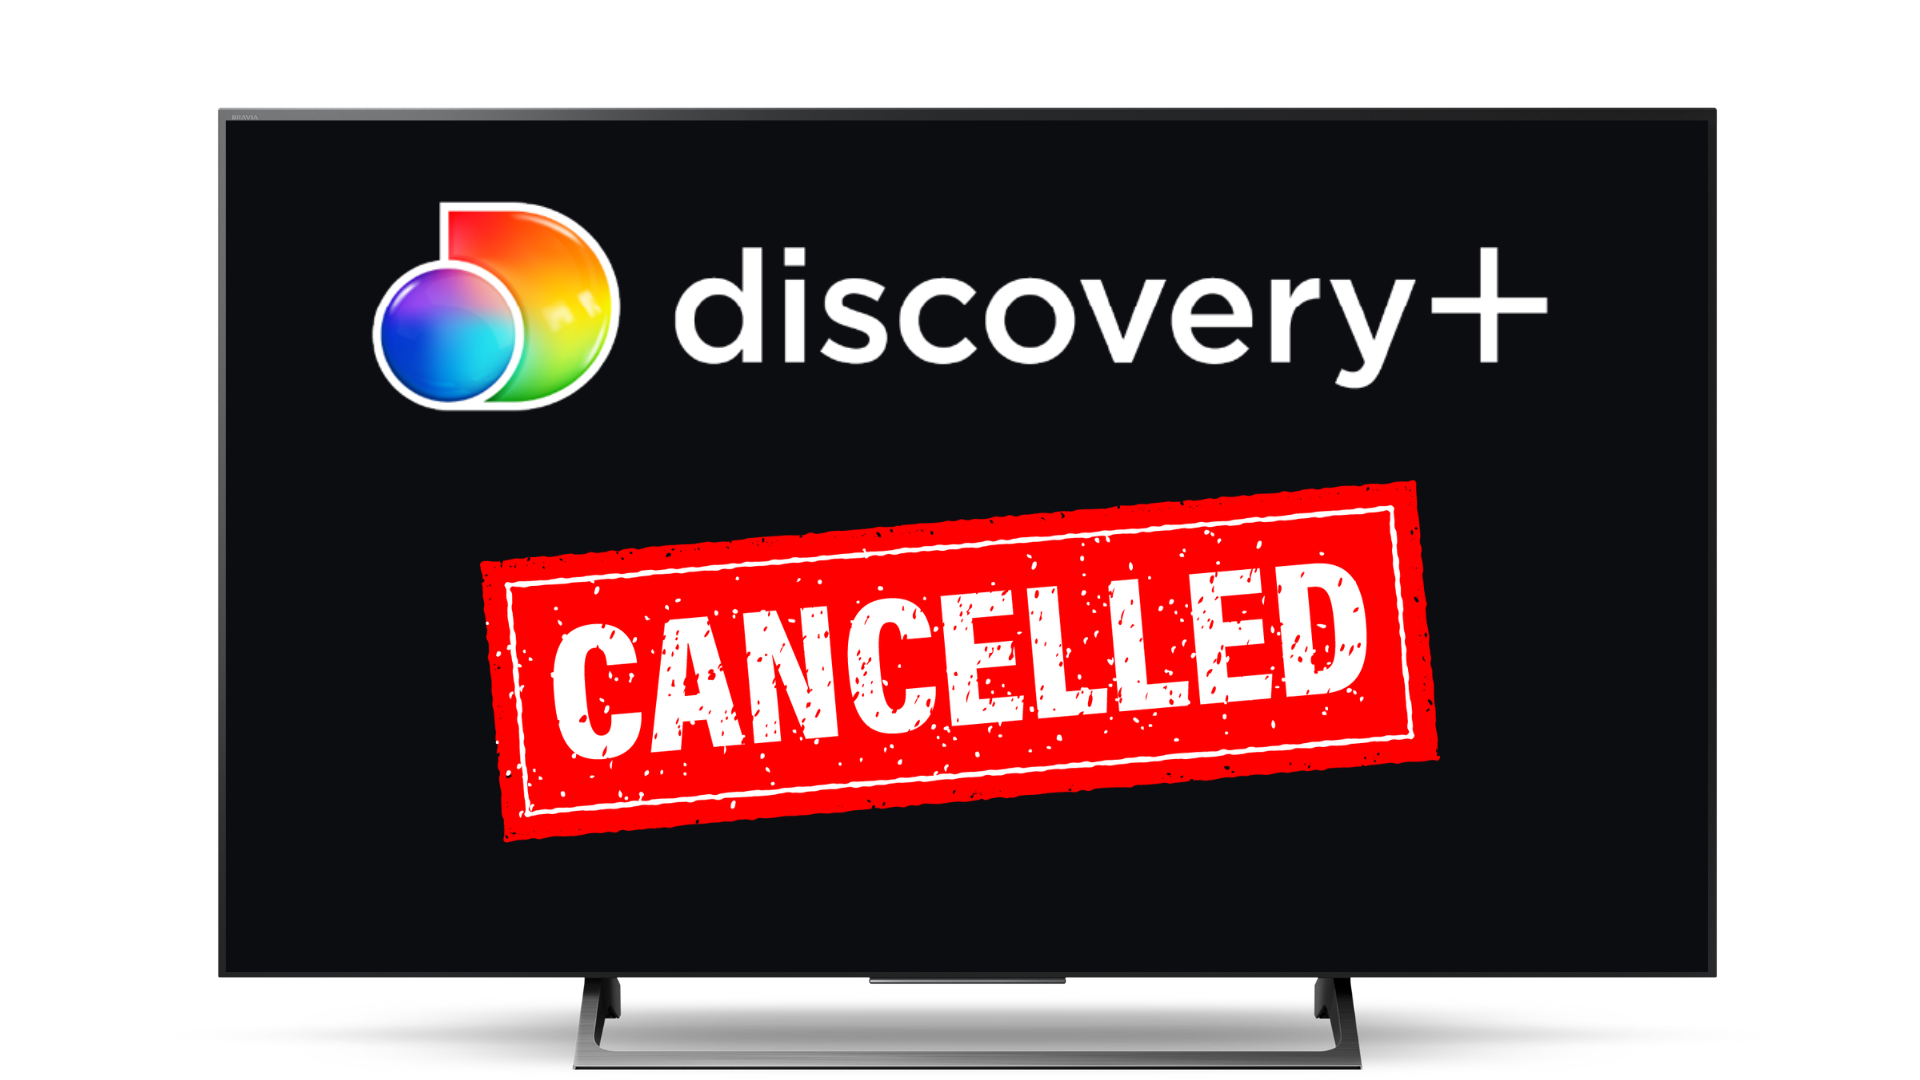 how to cancel discovery plus